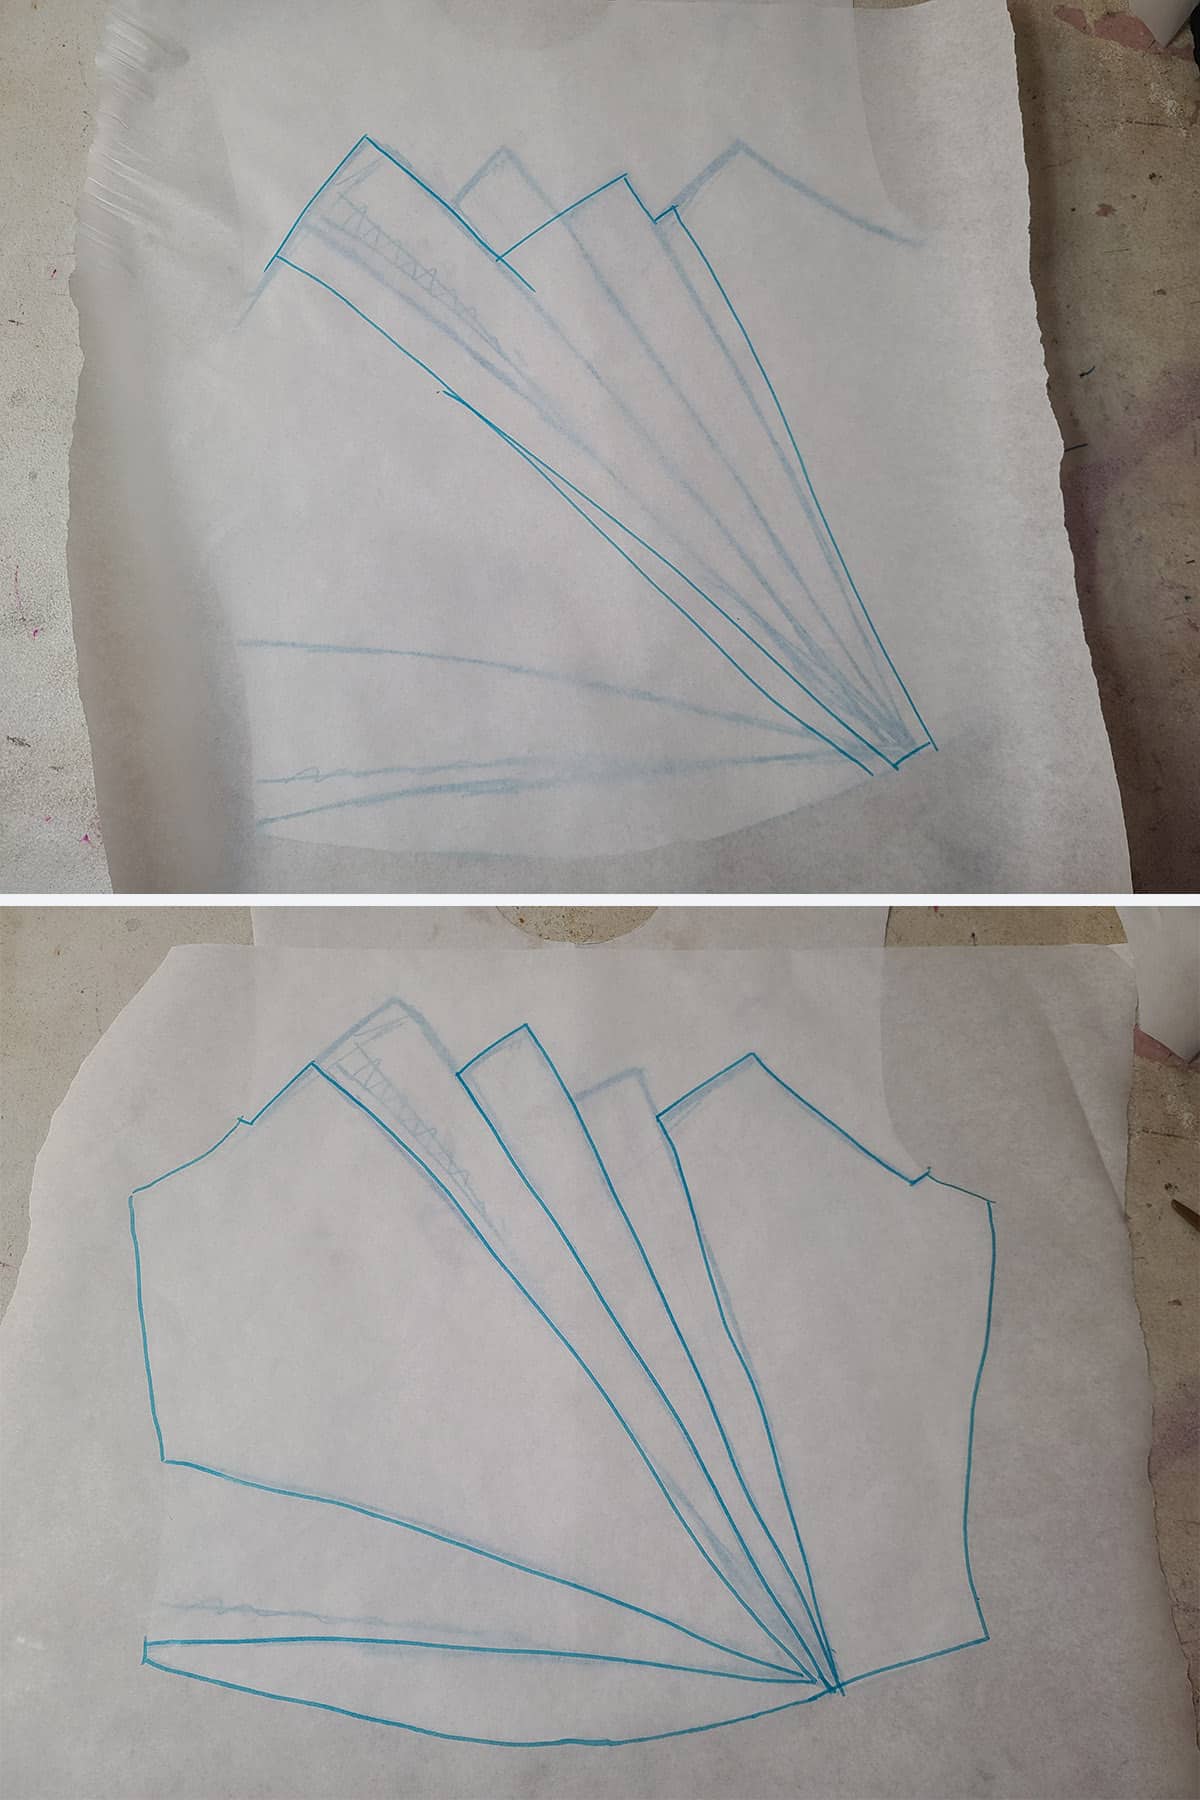 A 2 part image showing tracing paper being used to transfer design elements to a new paper piece.